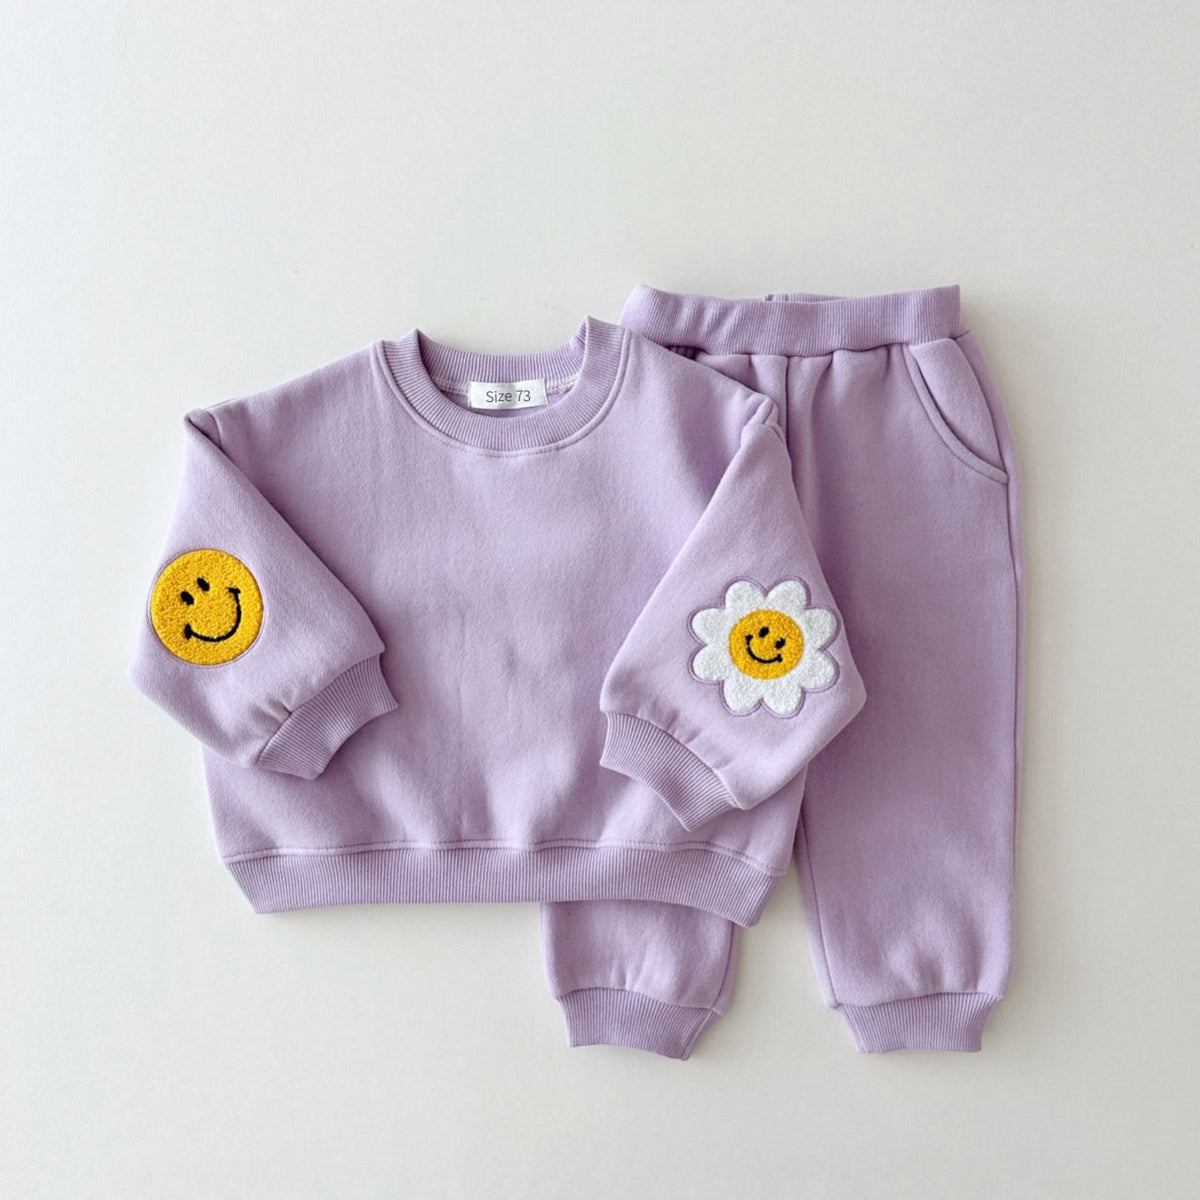 Sunny smile baby sweater sets 0- 3 Years